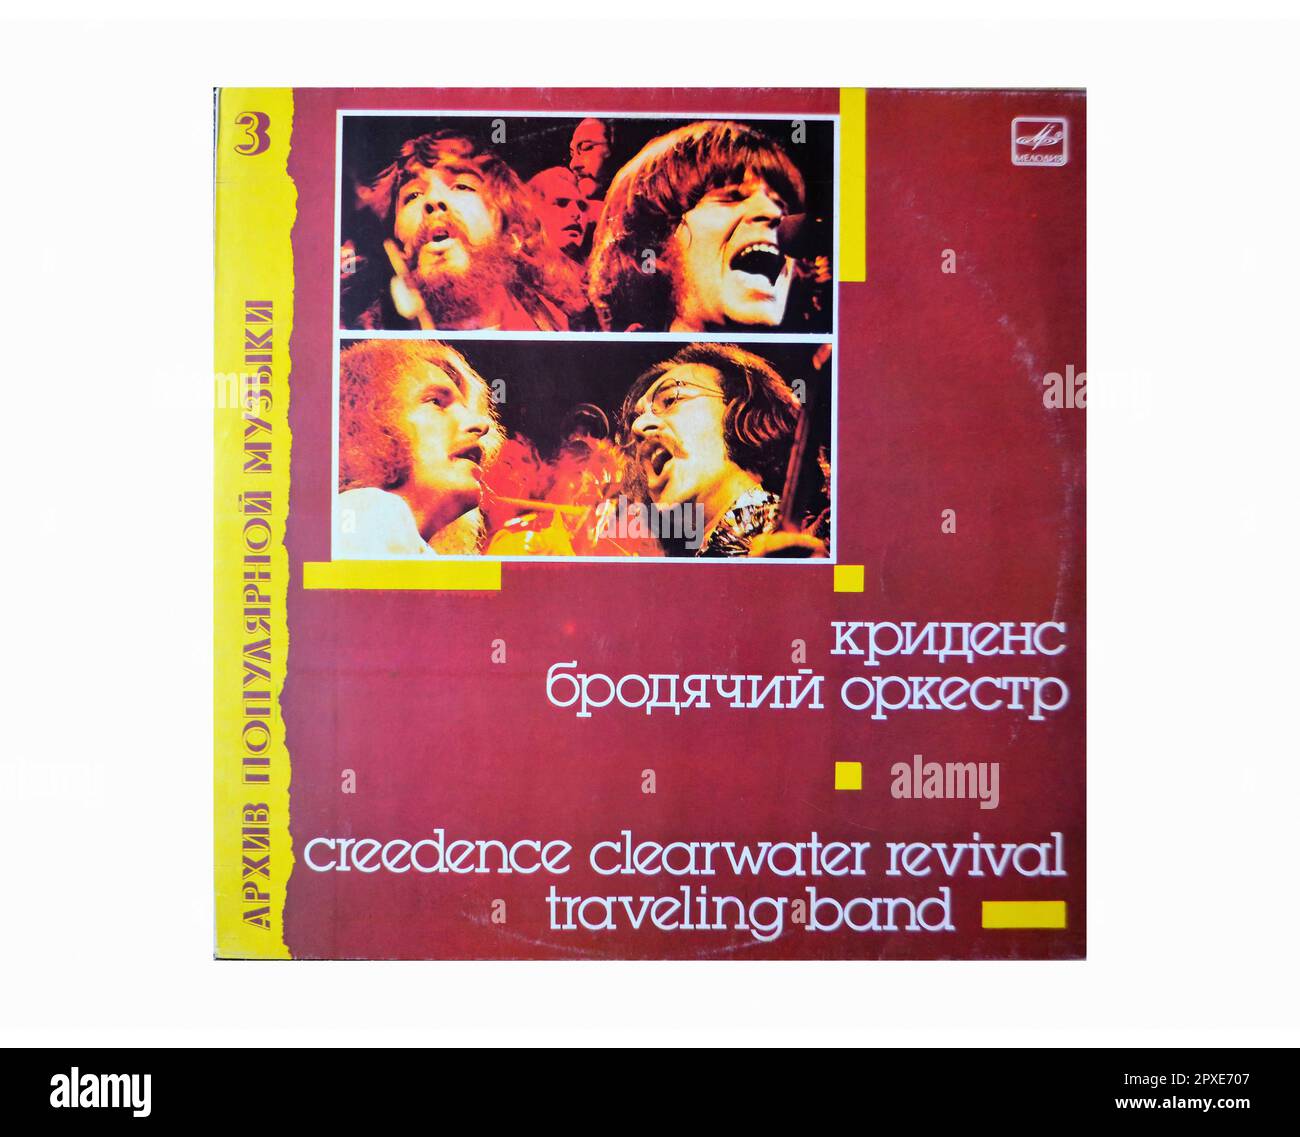 Creedence Clearwater Revival - Travelling Band - Vintage L.P Music Vinyl Record Stock Photo